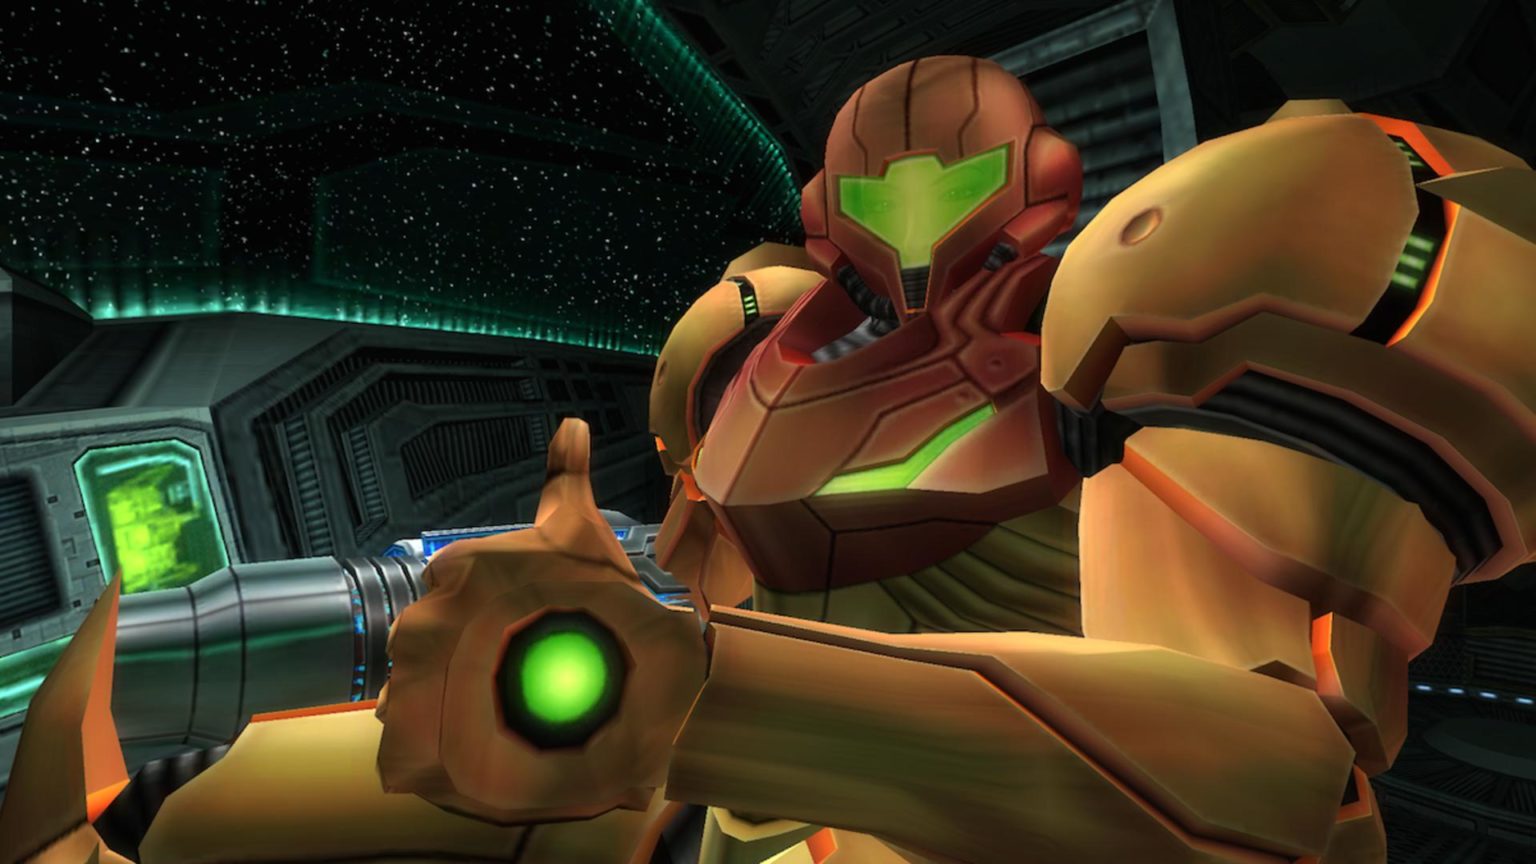 metroid-prime-remastered-coming-to-nintendo-switch-today-gameranx